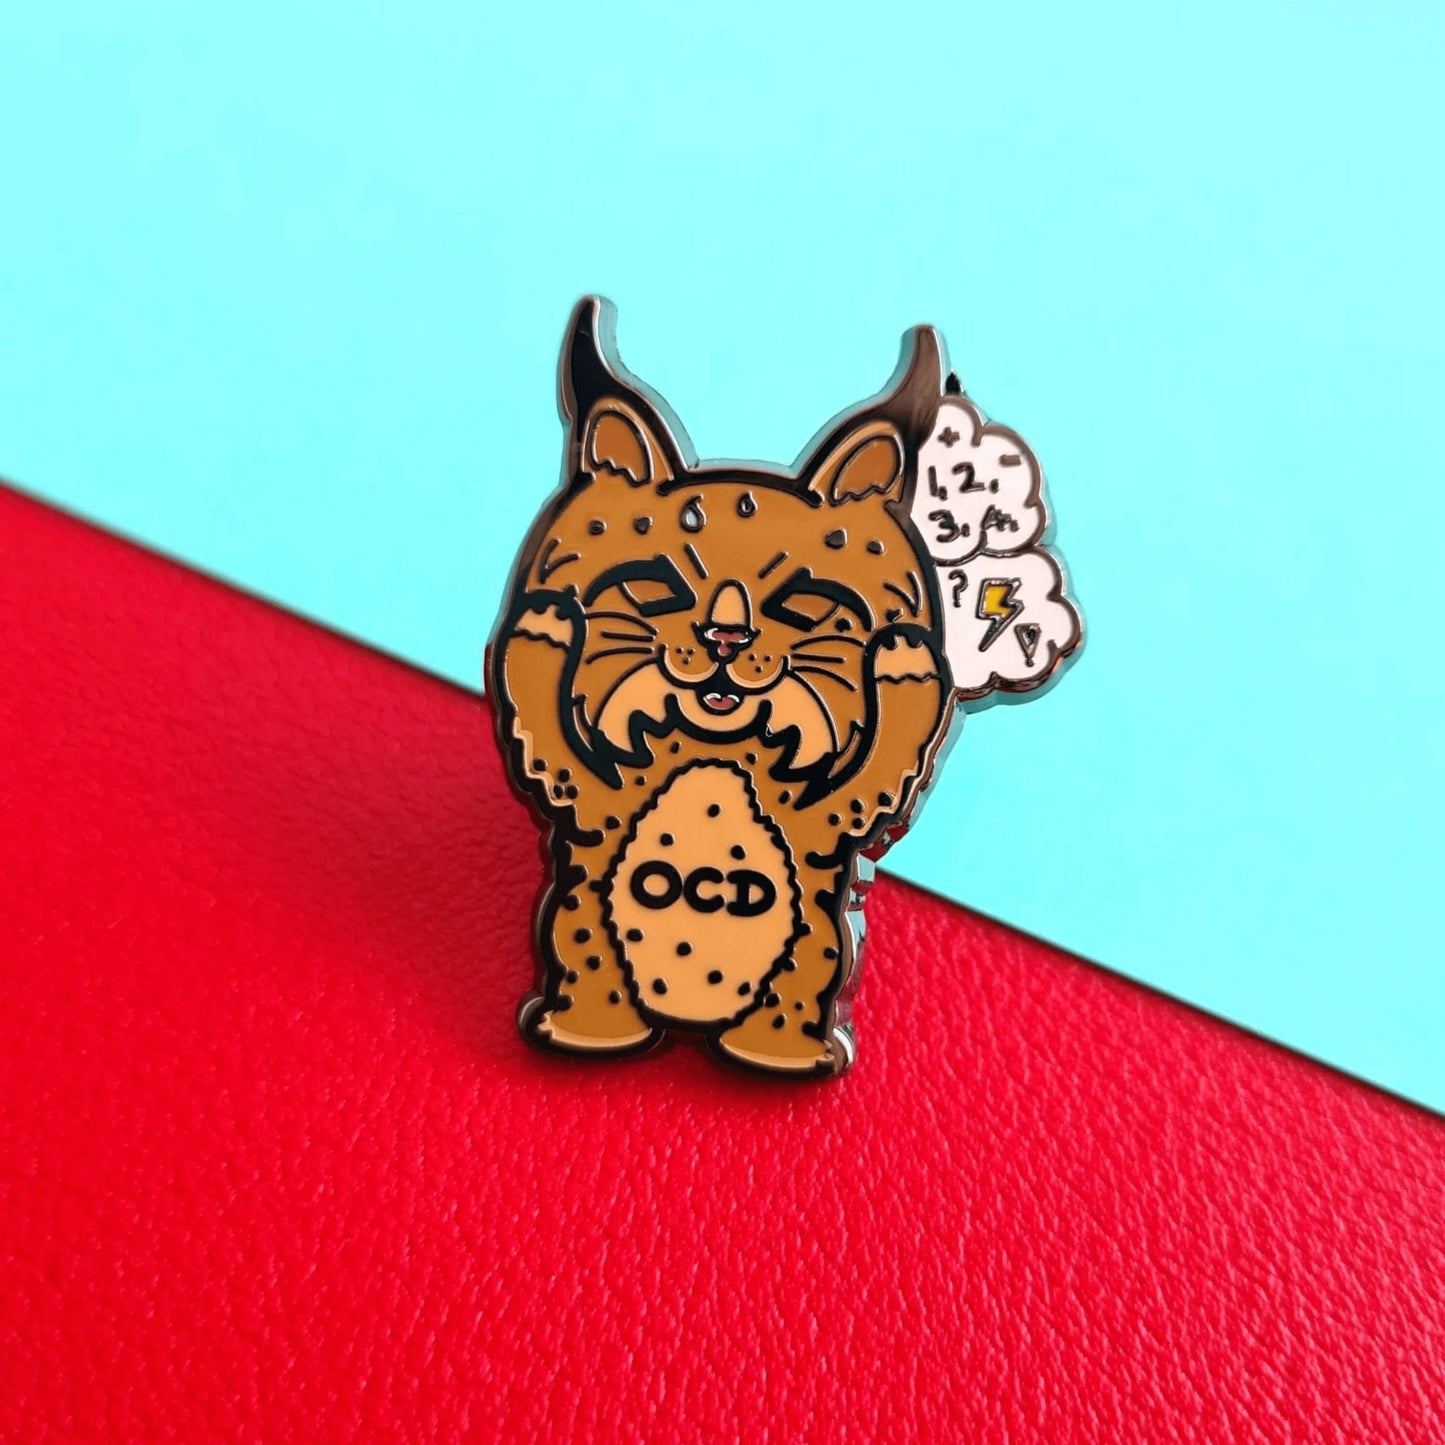 Bobsessive Compulsive Disorder Enamel Pin - OCD on a red and blue background. The bobcat shape pin is brown with a stressed expression clutching its face with a thought bubble of numbers, question marks and lightning bolts. Across its tummy reads OCD. The pin was designed to raise awareness of obsessive compulsive disorder.